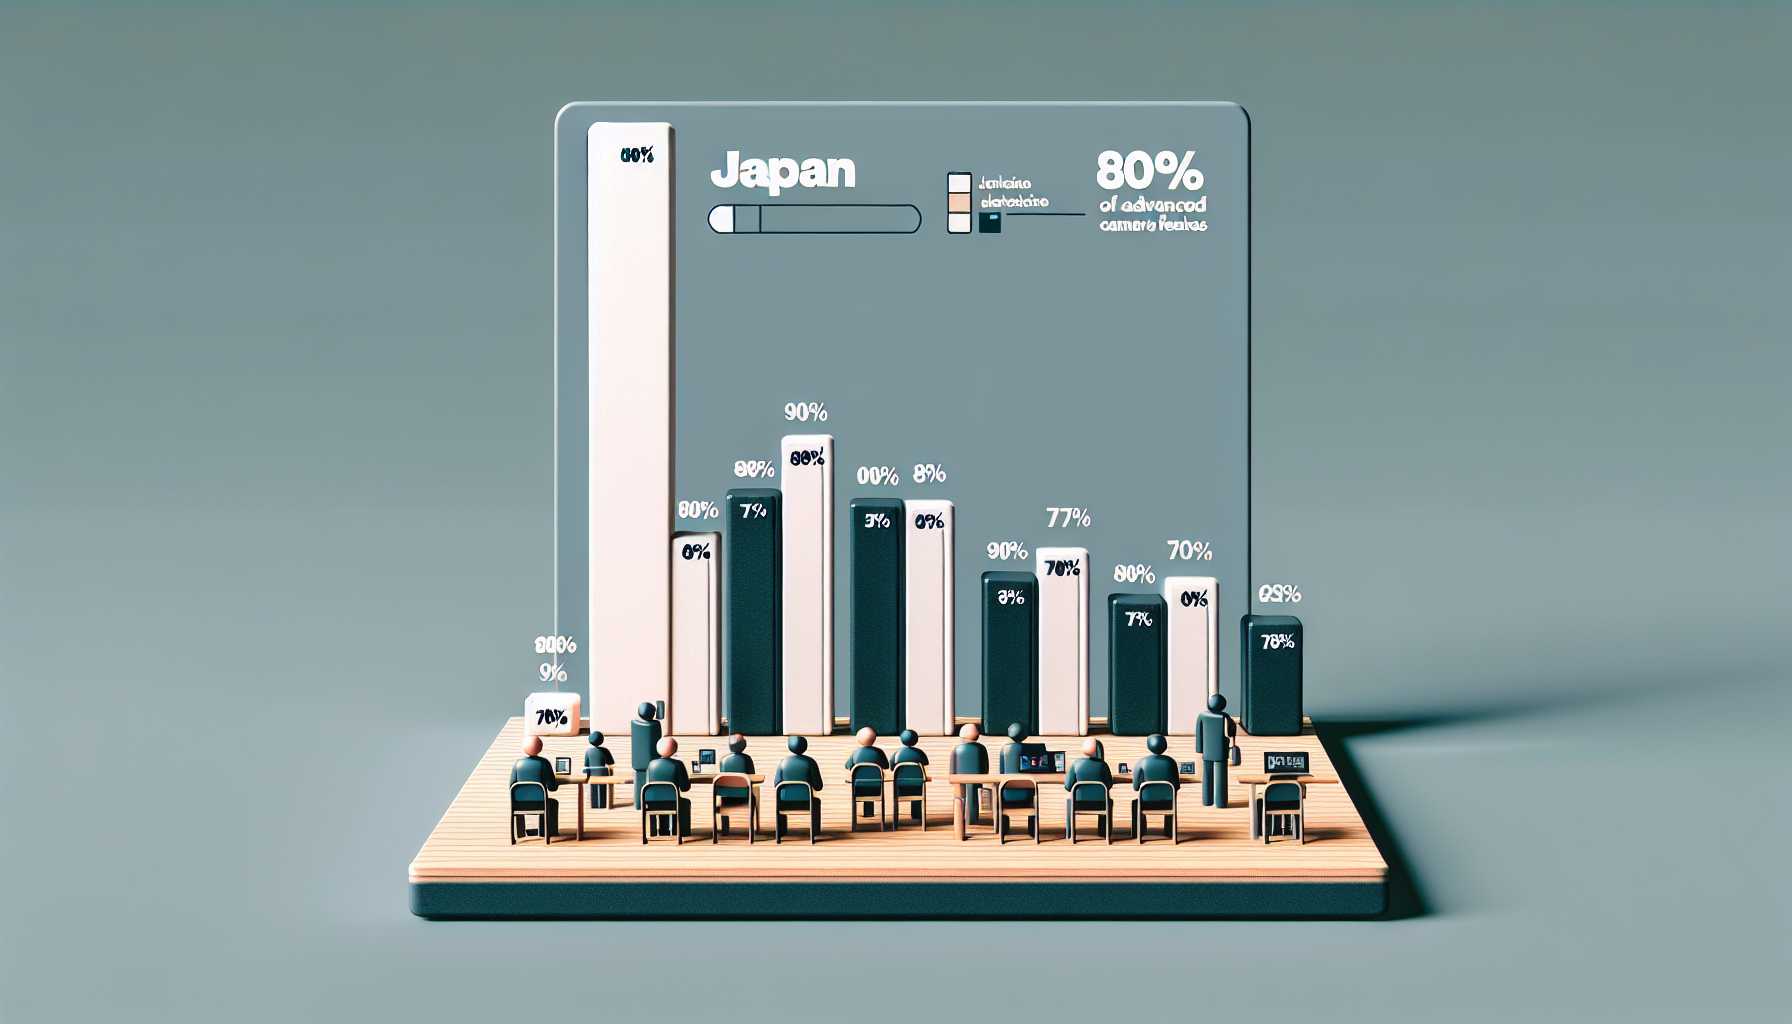 a graph showing that 80% of smartphone users in Japan have devices with advanced camera features